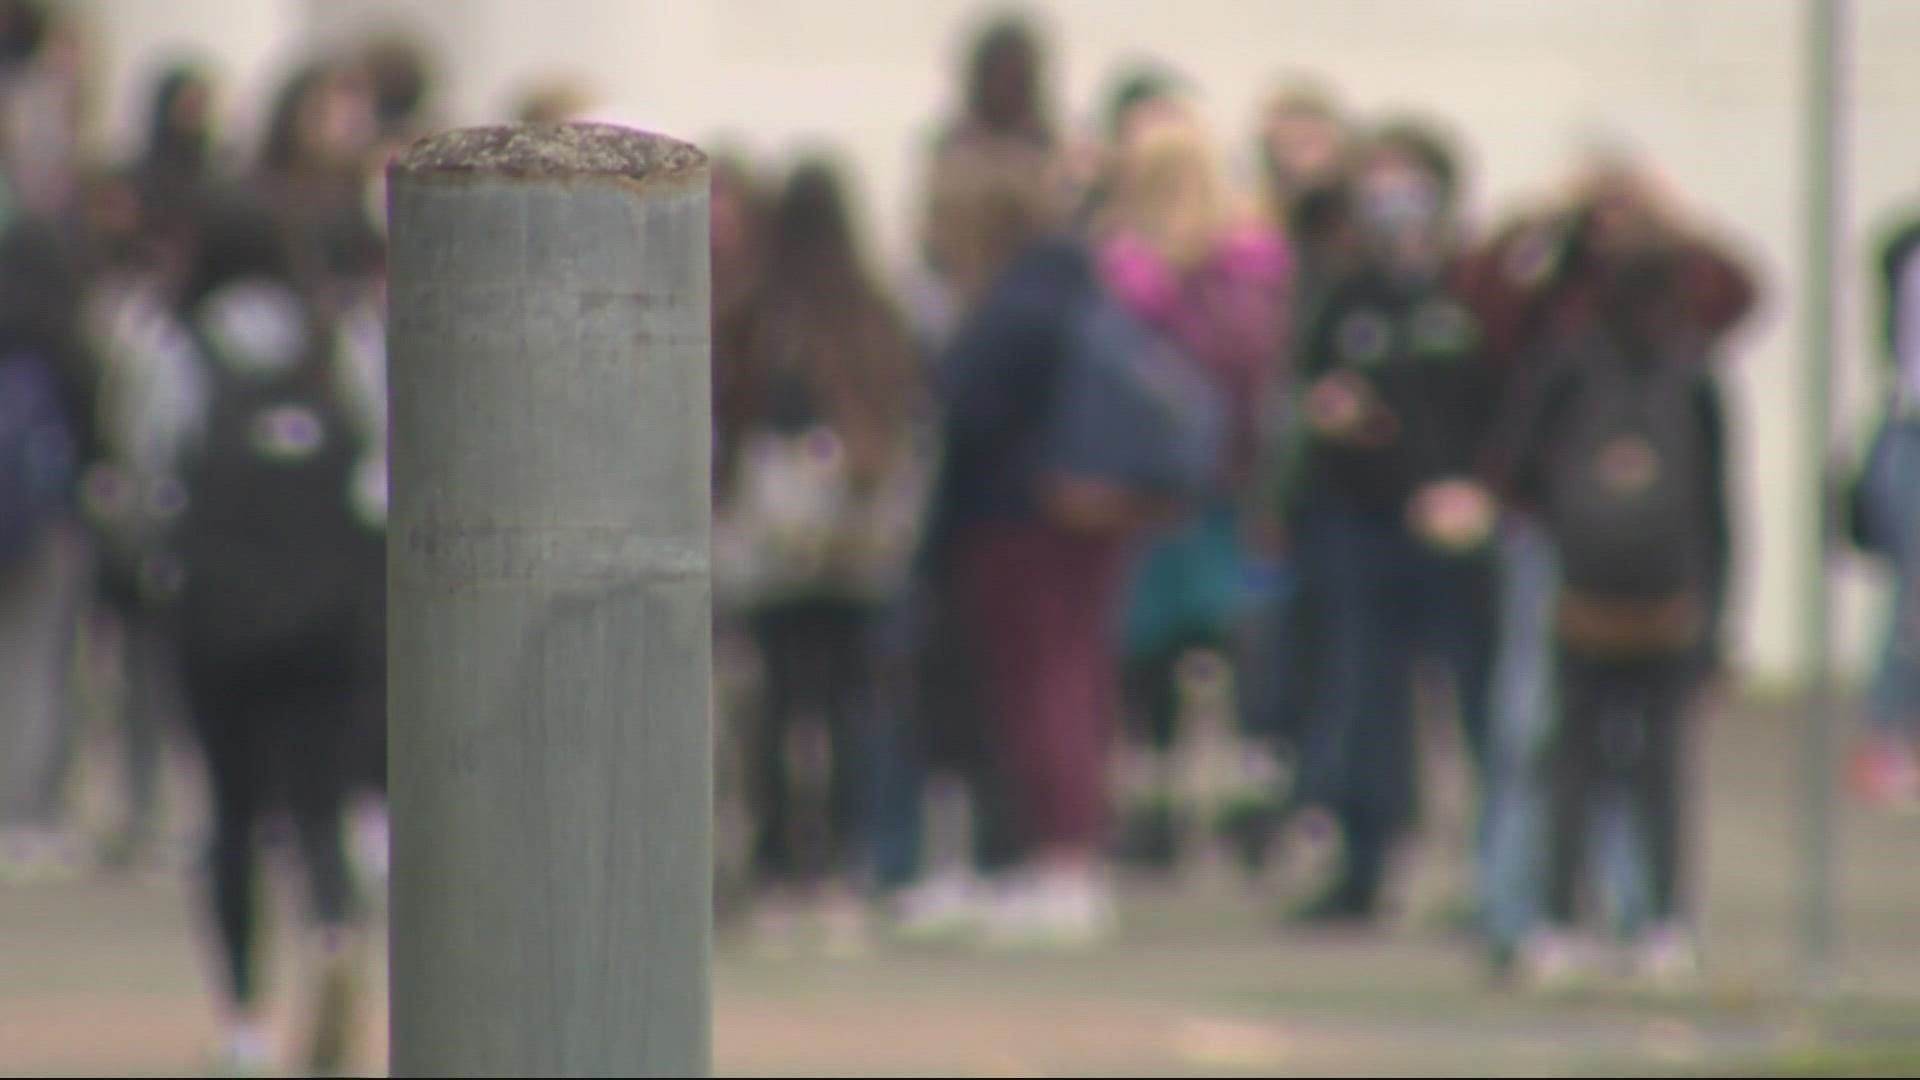 The staffing shortage in education has been exacerbated by the pandemic, but as teachers told KGW’s Christine Pitawanich, it’s a result of more than that.